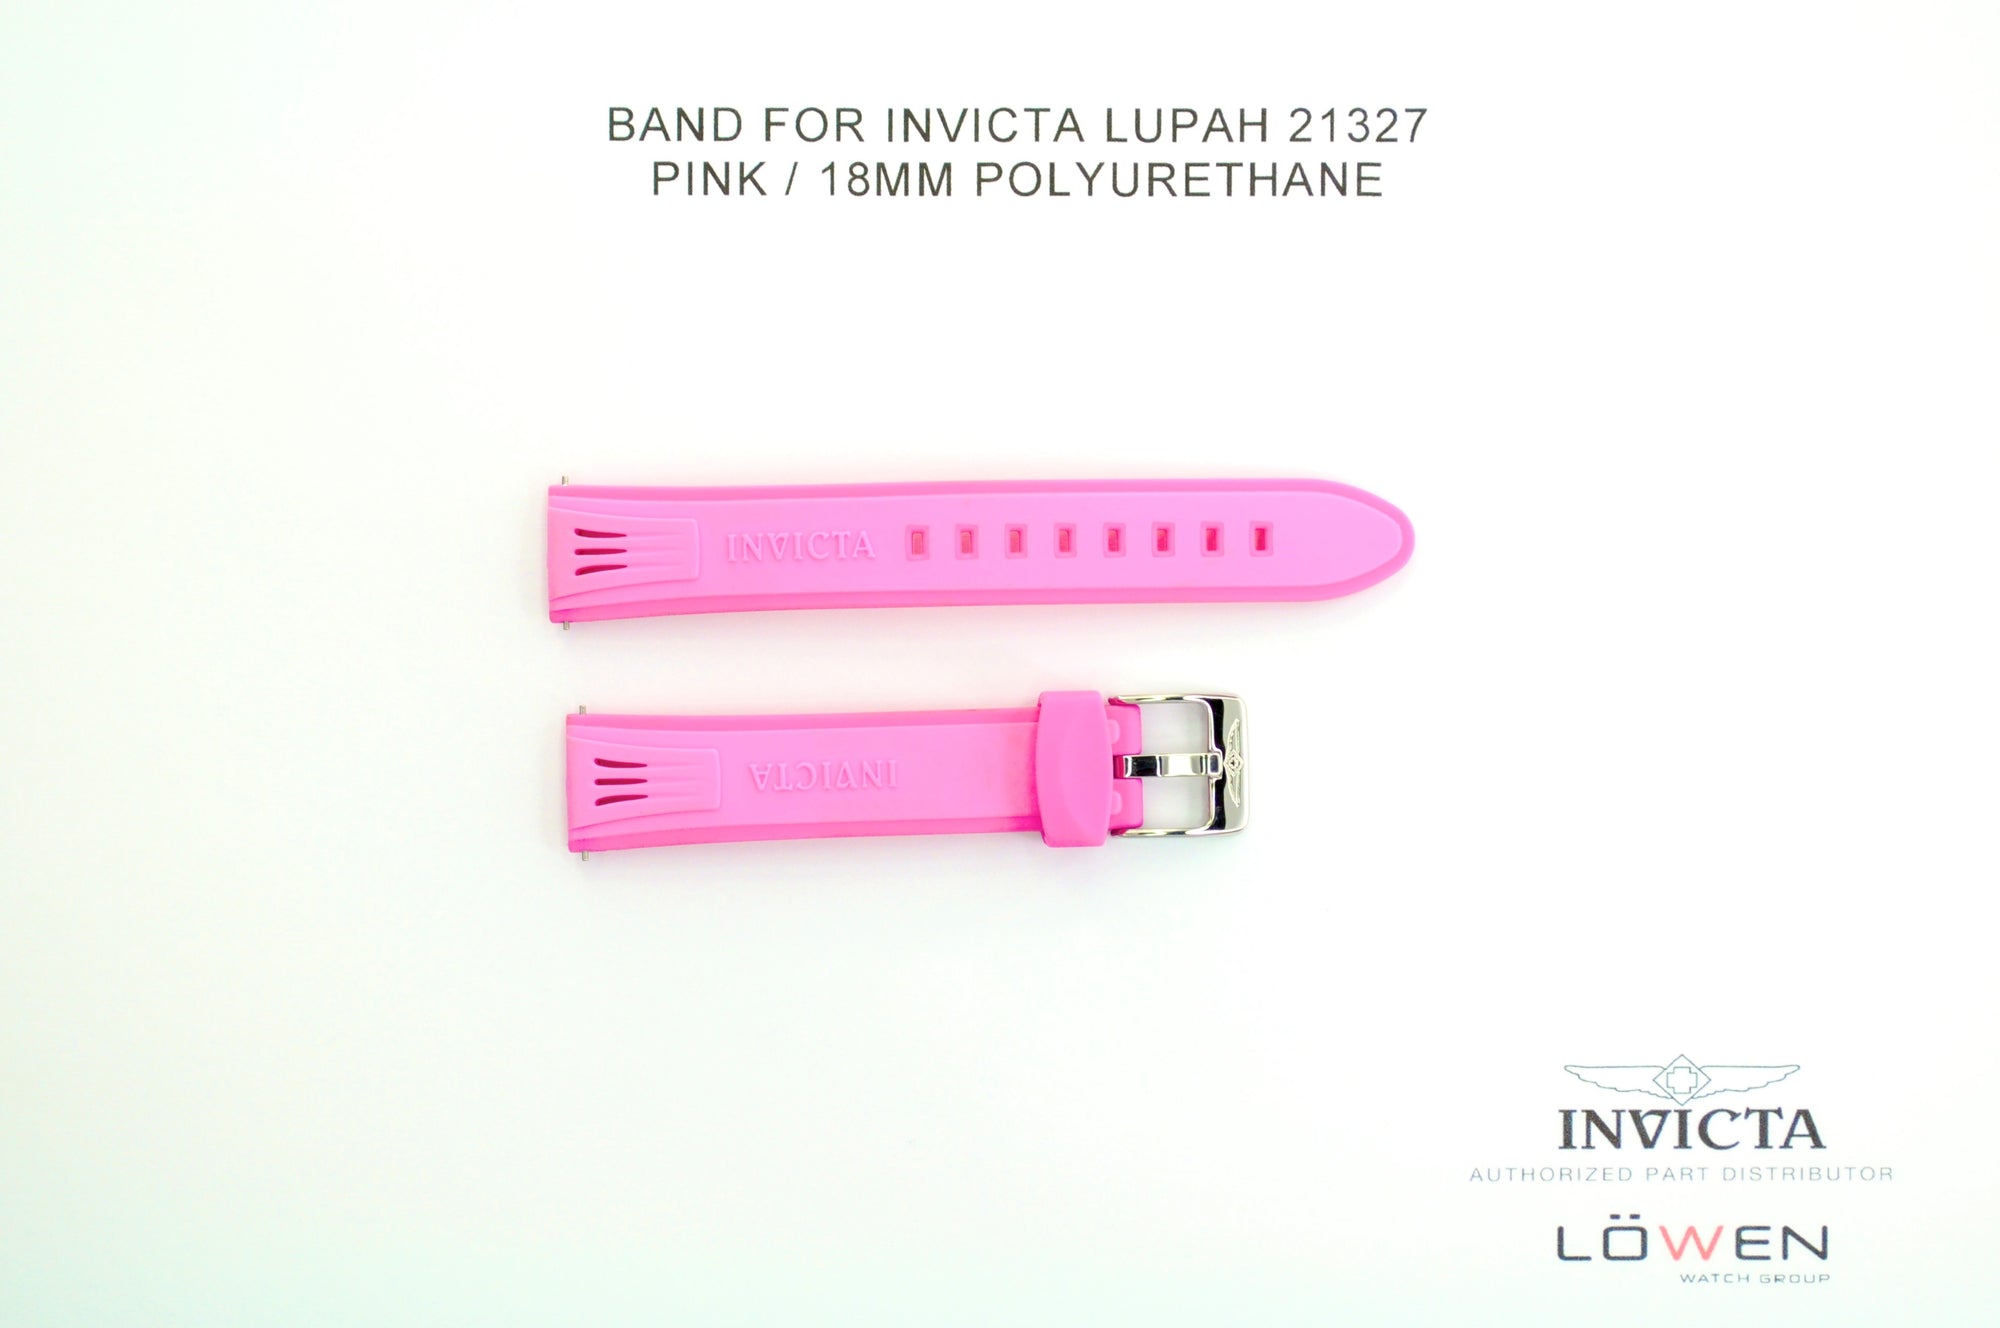 Band for Invicta Lupah 21327